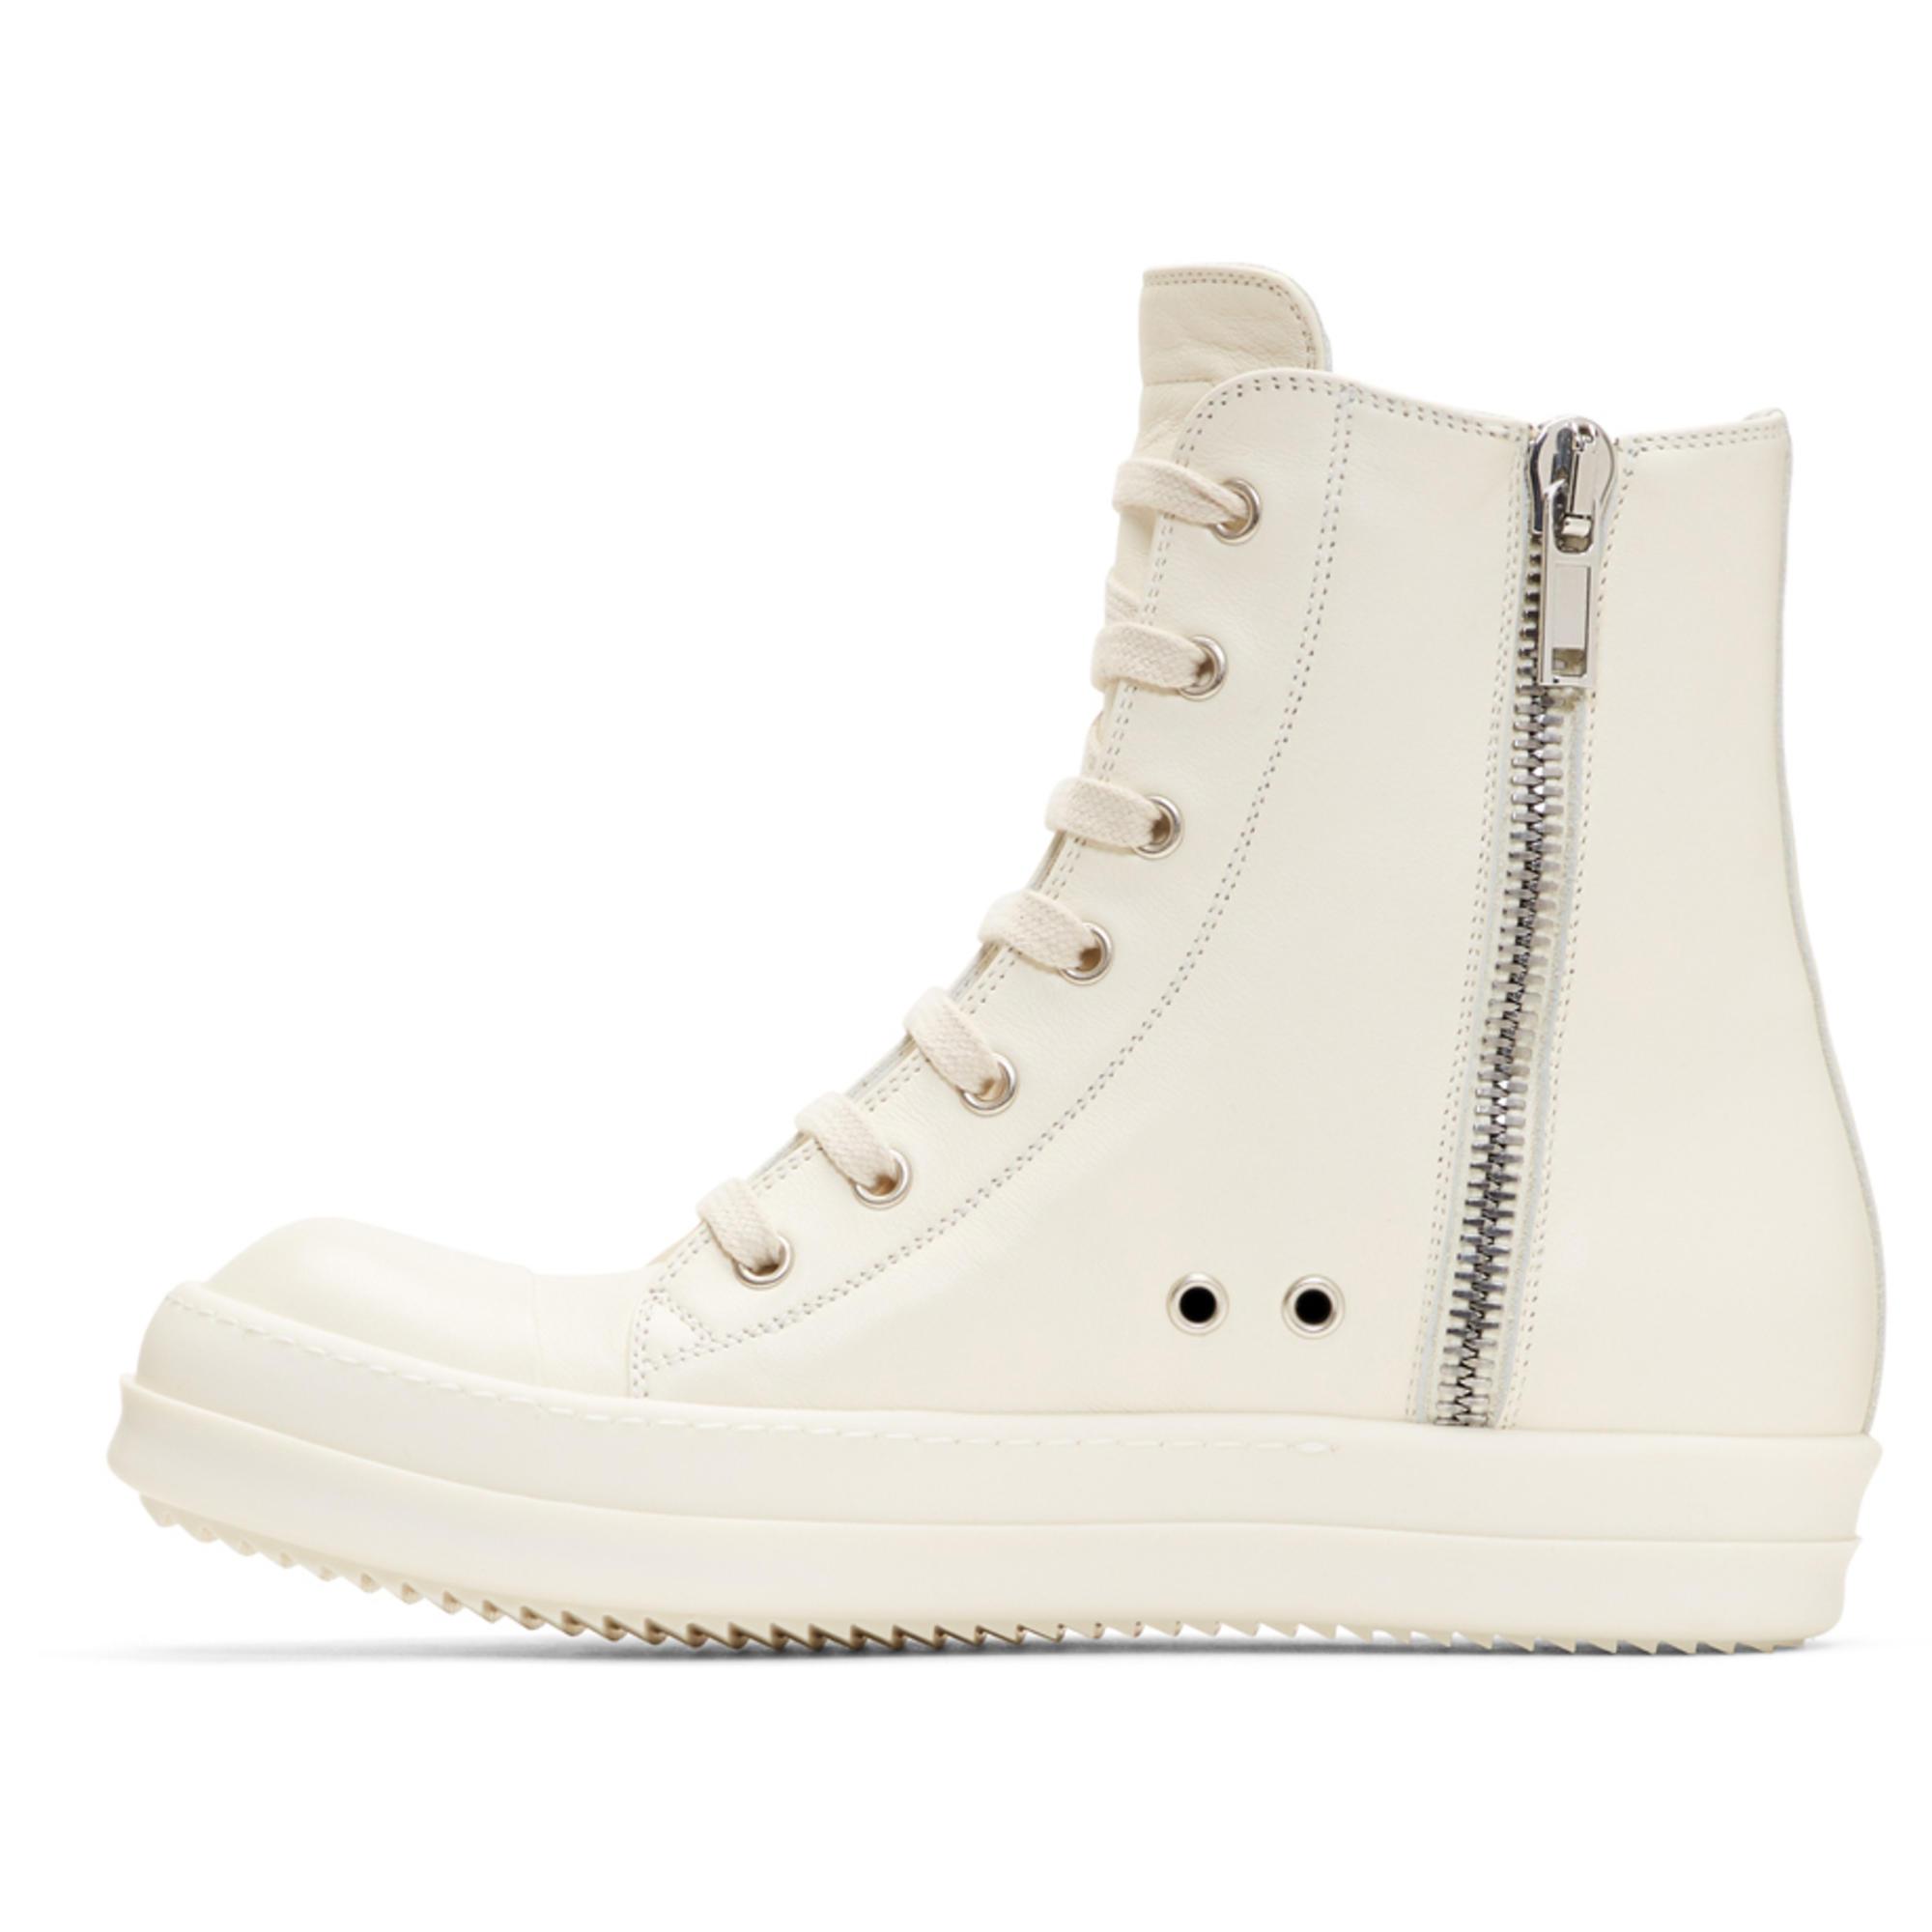 Lyst - Rick Owens Off-white Leather High-top Sneakers in White for Men